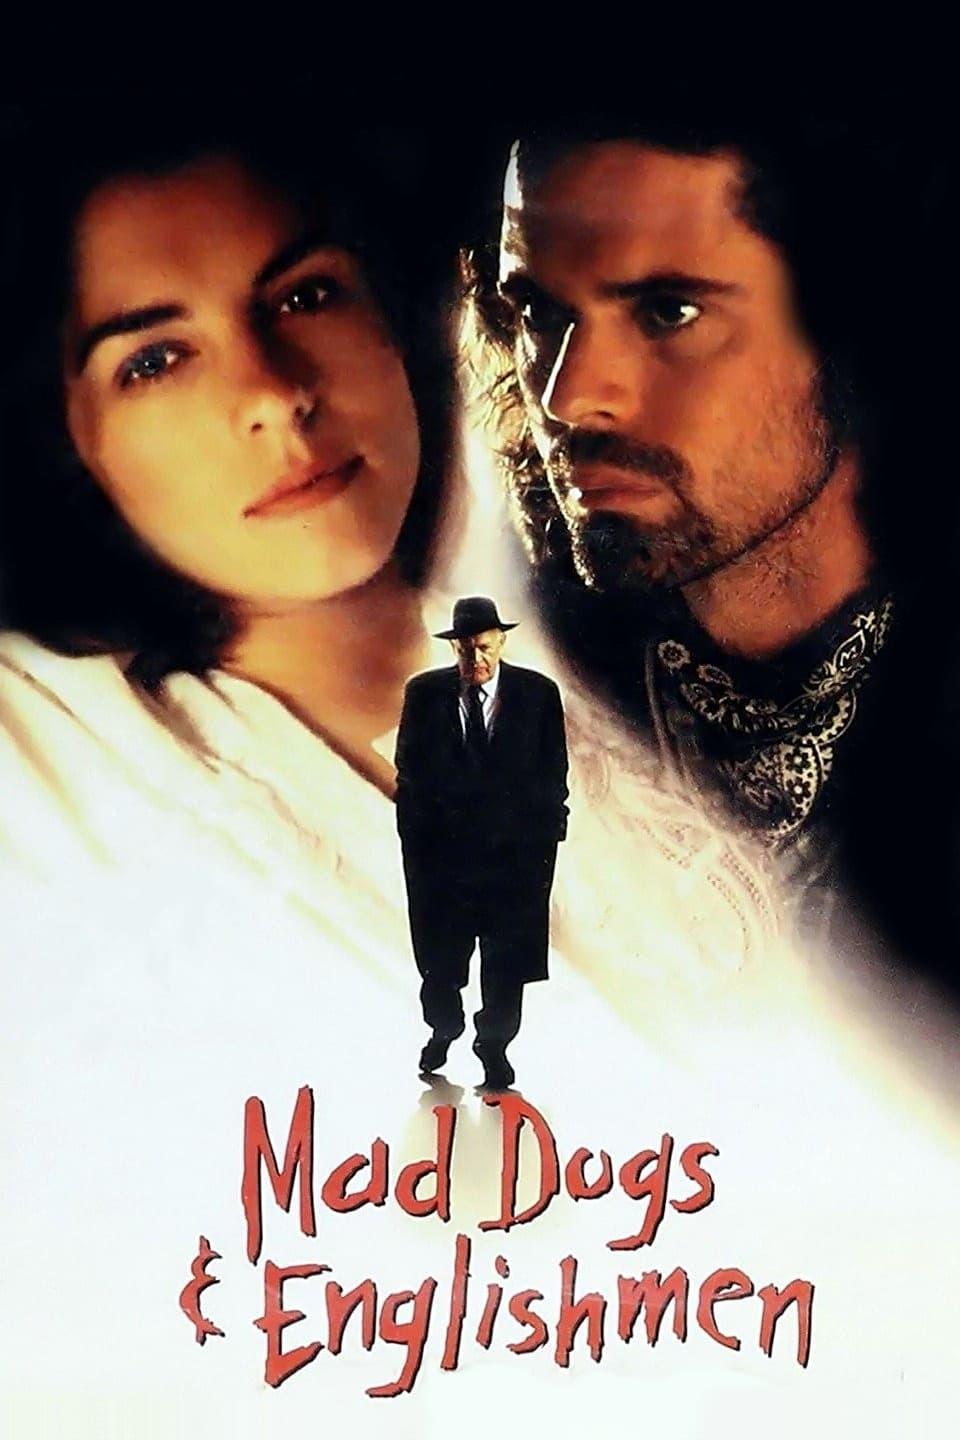 Mad Dogs and Englishmen poster